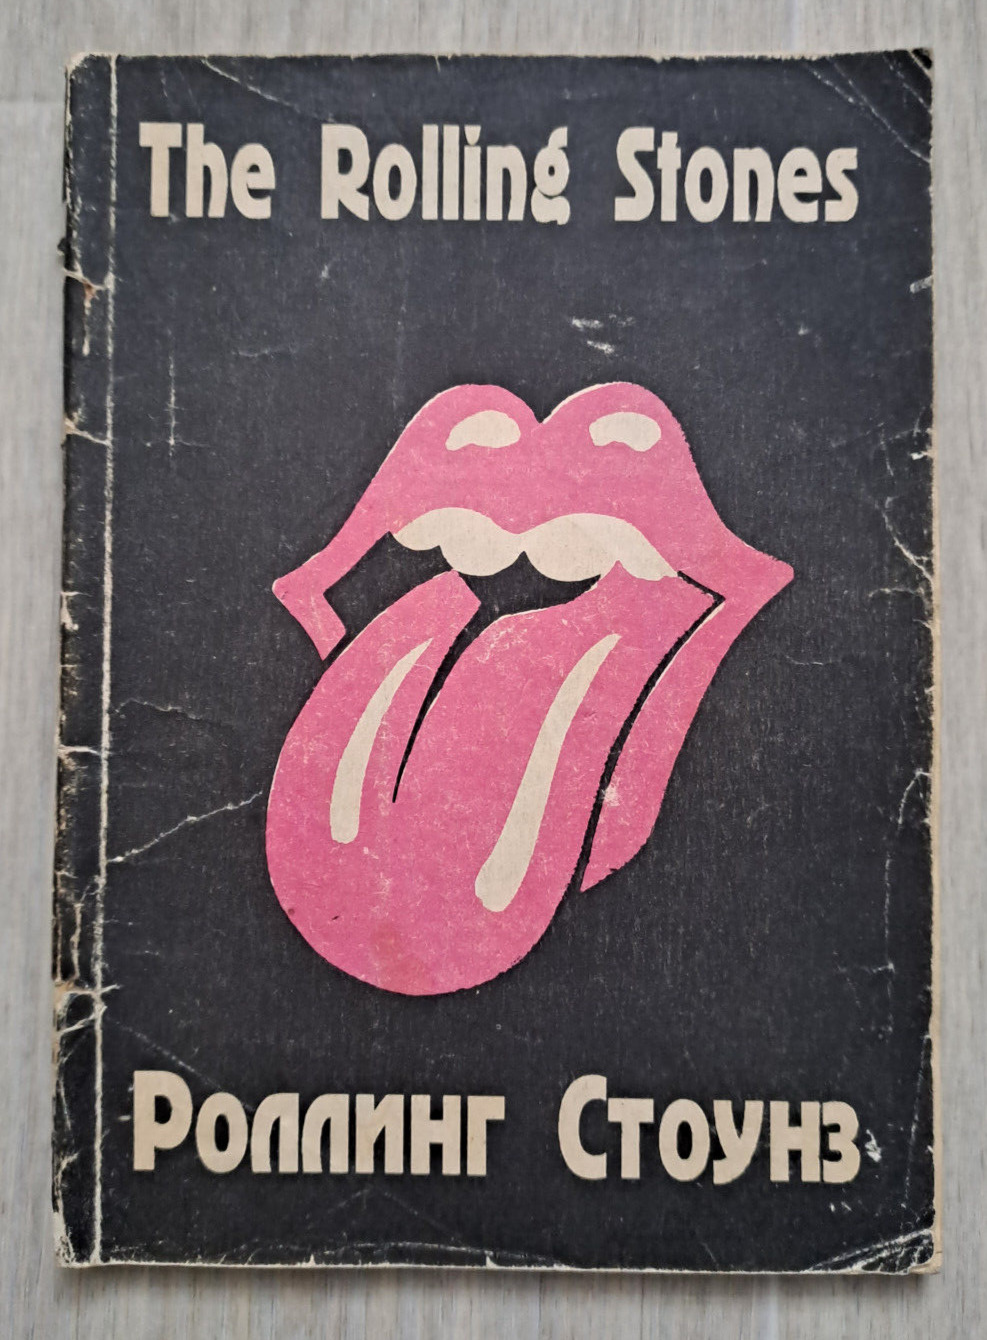 1992 Rolling Stones Mick Jagger Rock Musicians Music Discography Russian book